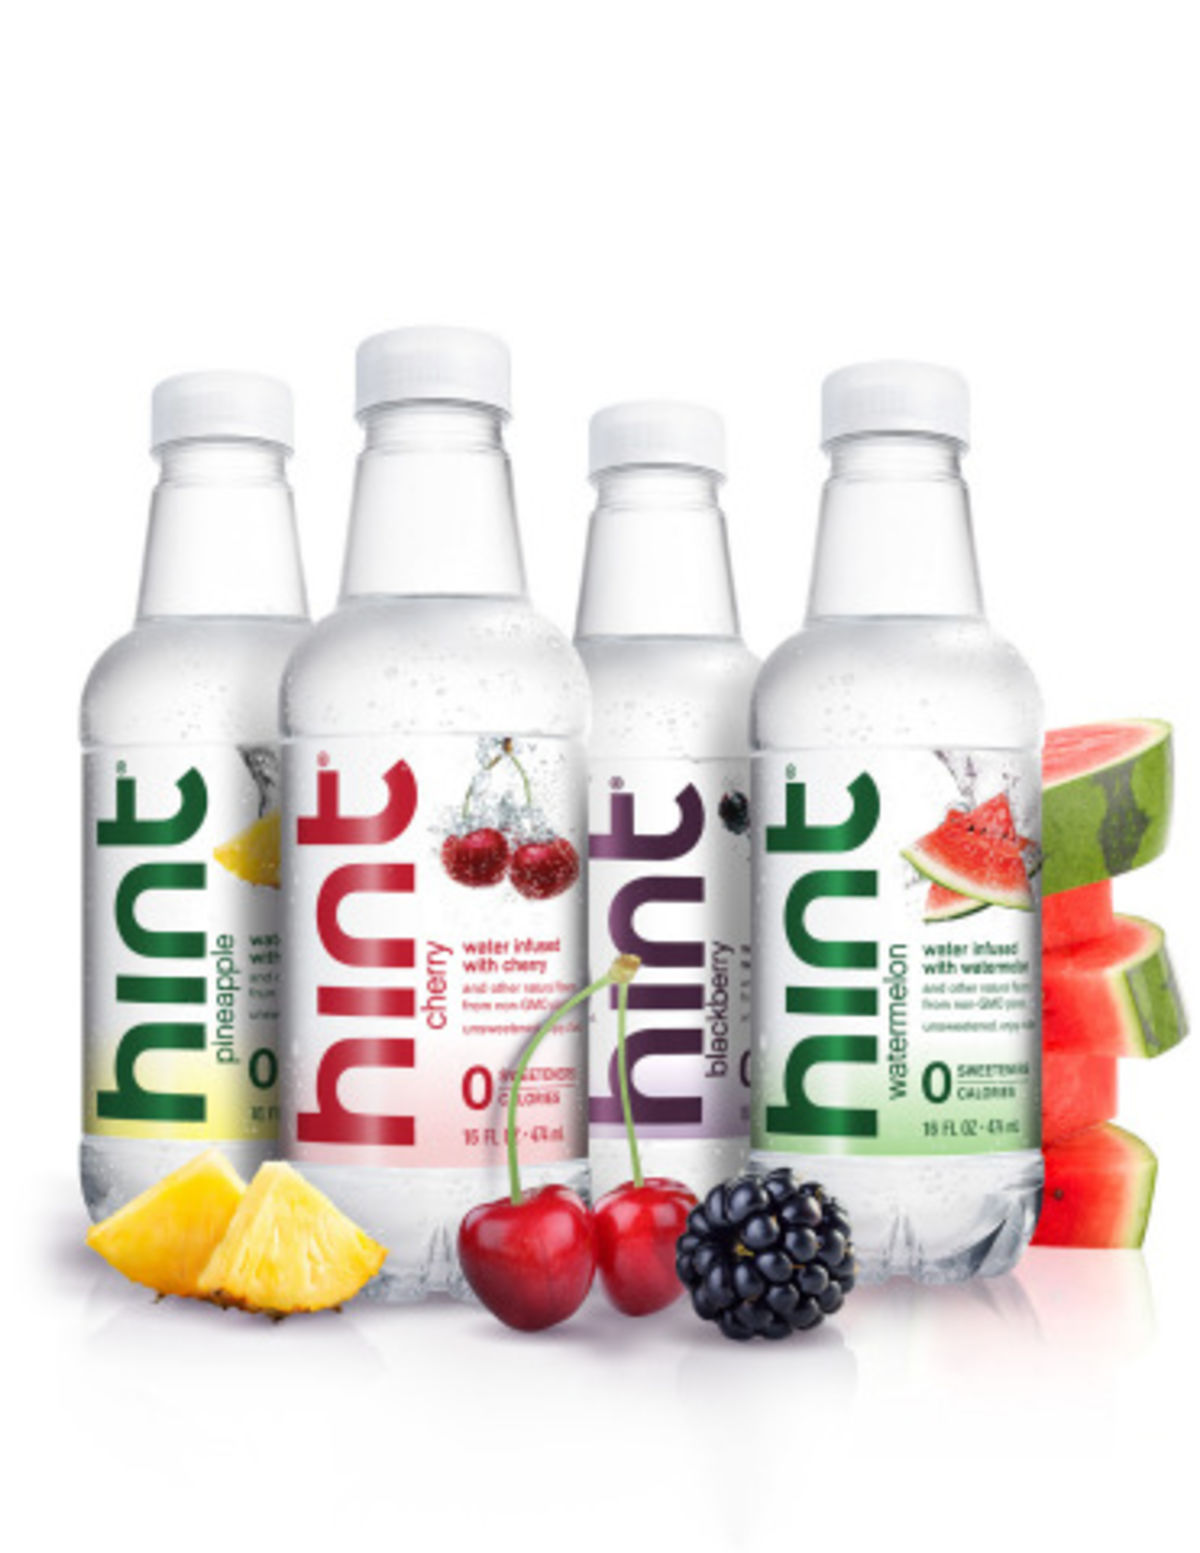  Multiyear Agreement Names hint® the Official Flavored Water across 12 AEG Music Venues in San Francisco, Los Angeles, New York and Boston